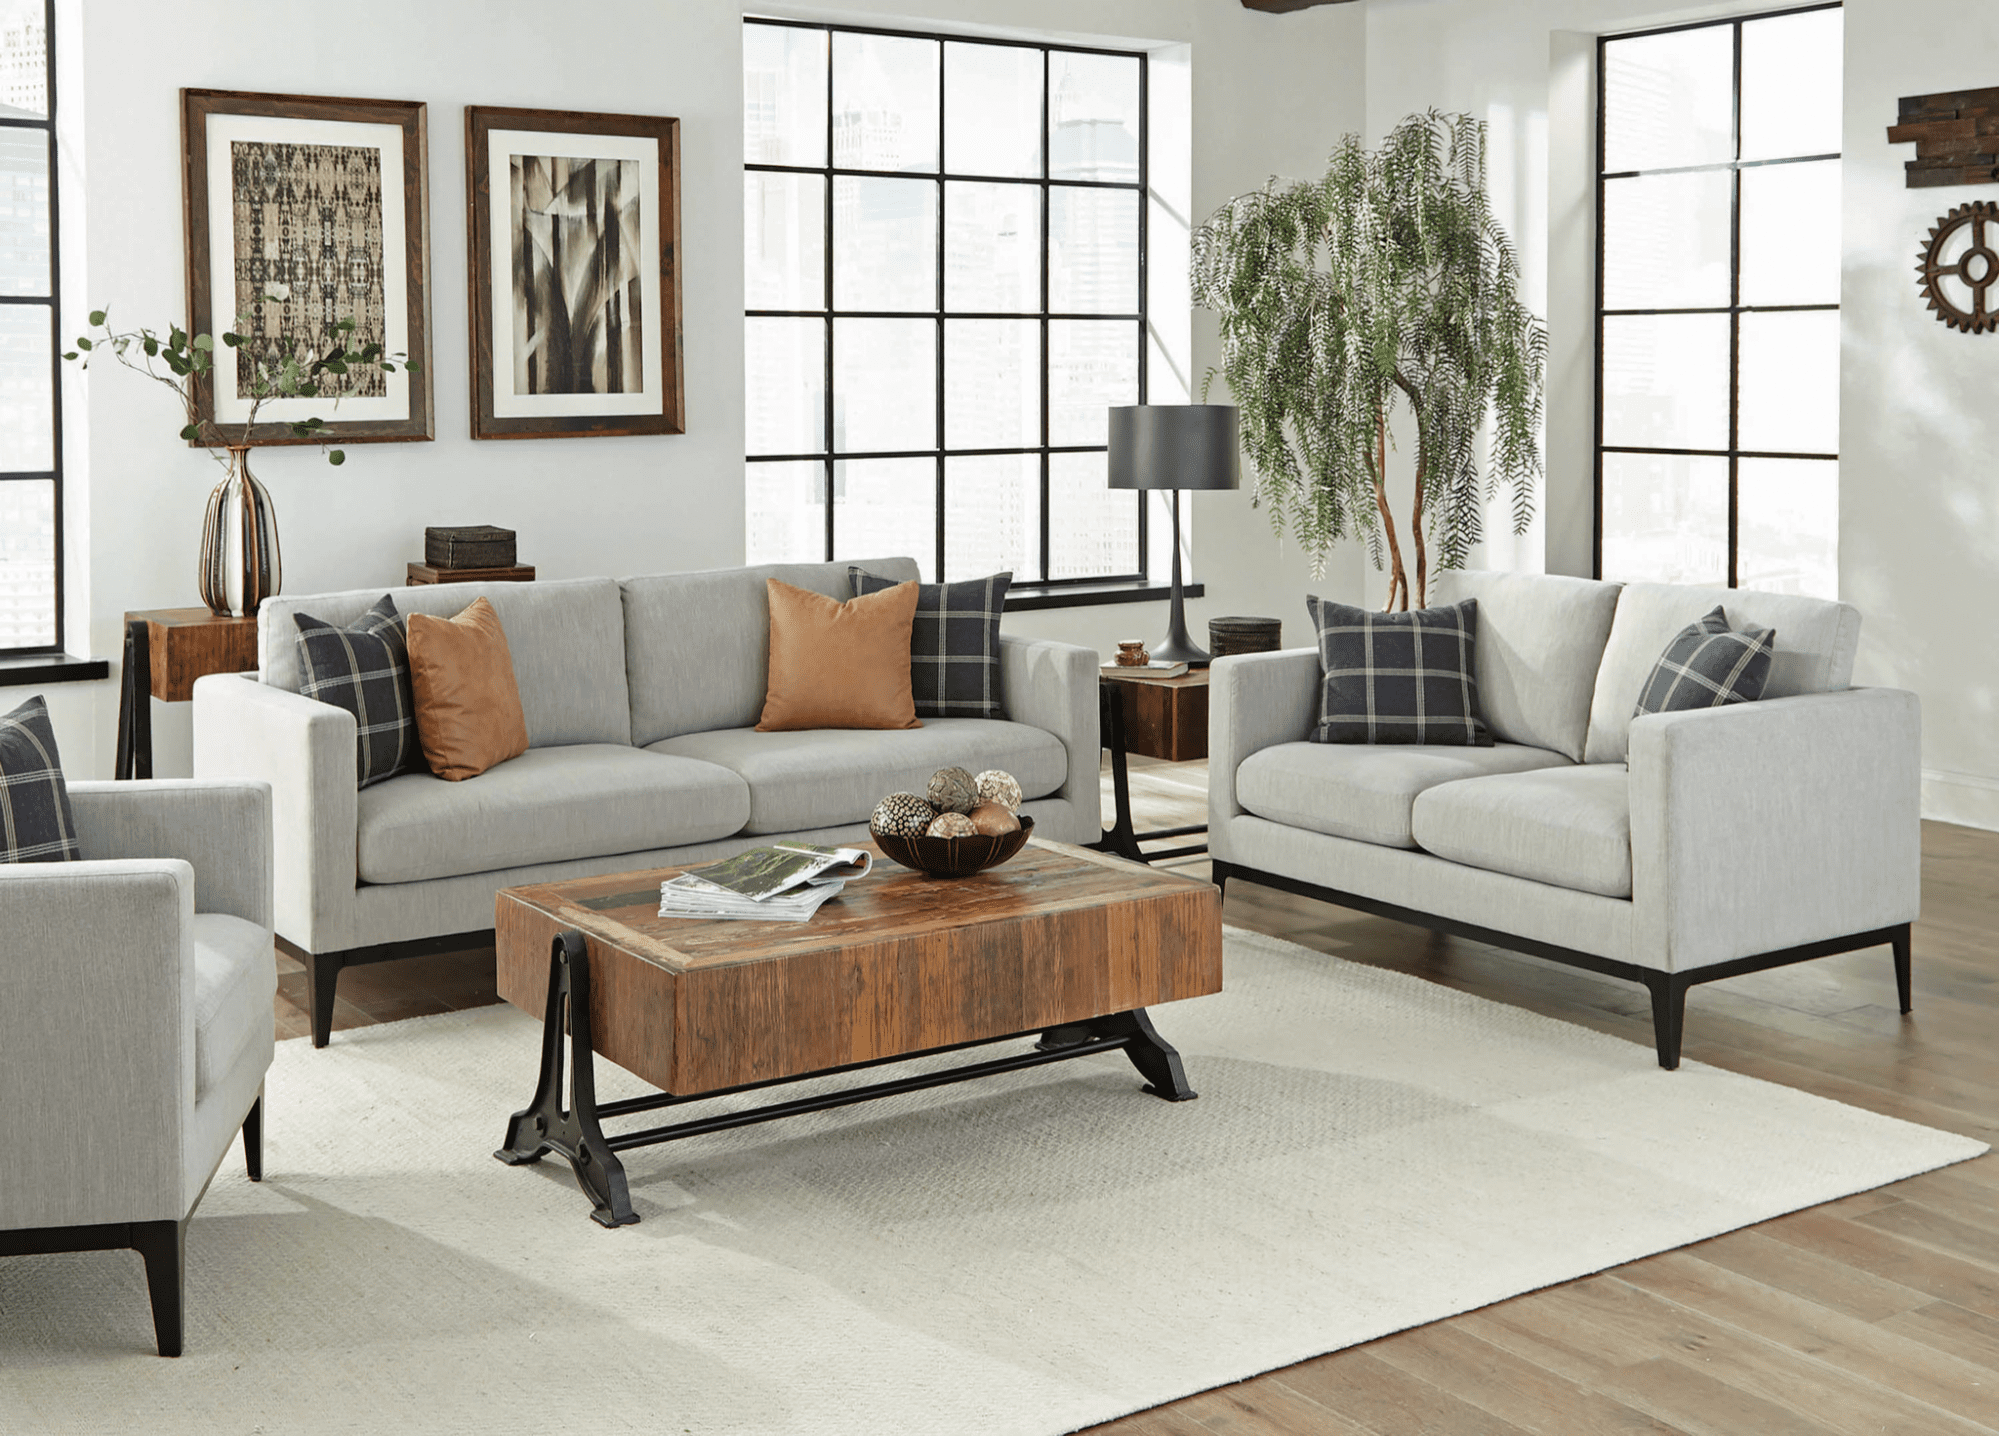 11 Wood Coffee Table Styles To Add Natural Beauty To Your Ho Regarding Transitional Square Coffee Tables (View 11 of 15)